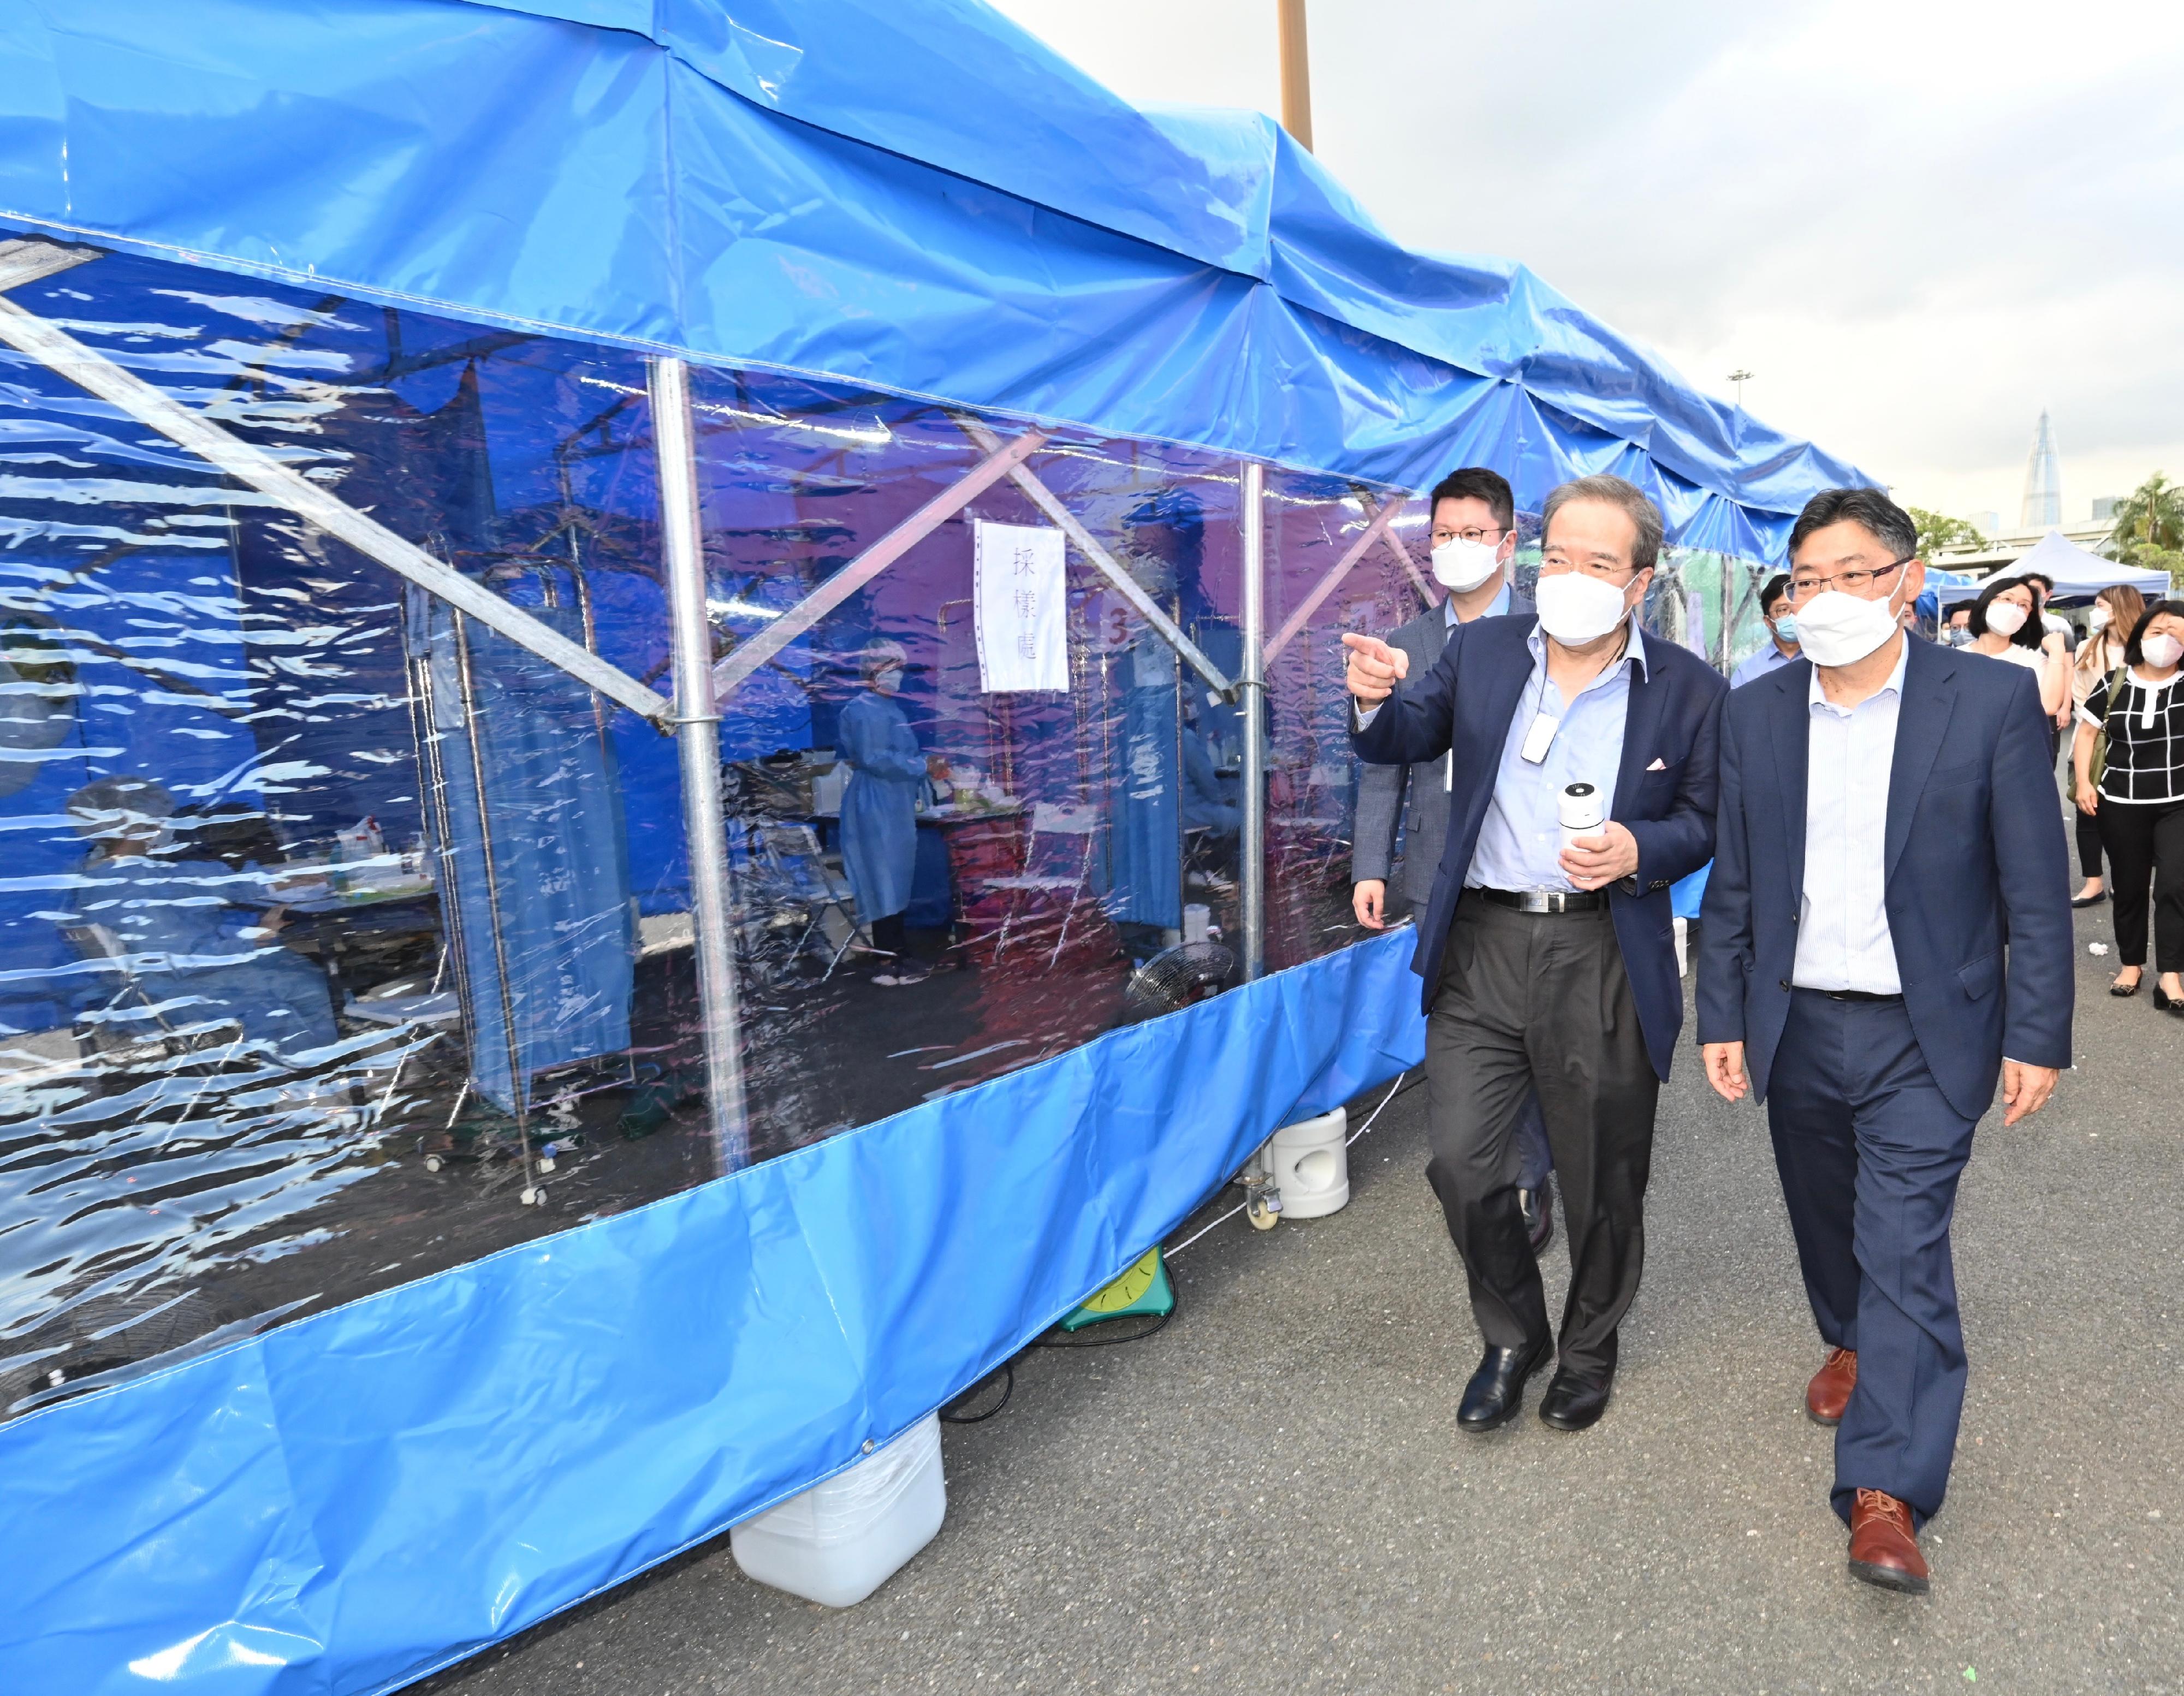 The Secretary for Transport and Logistics, Mr Lam Sai-hung (right), was briefed by a testing contractor's representative on the rapid nucleic acid testing arrangements at the Shenzhen Bay port today (July 8).